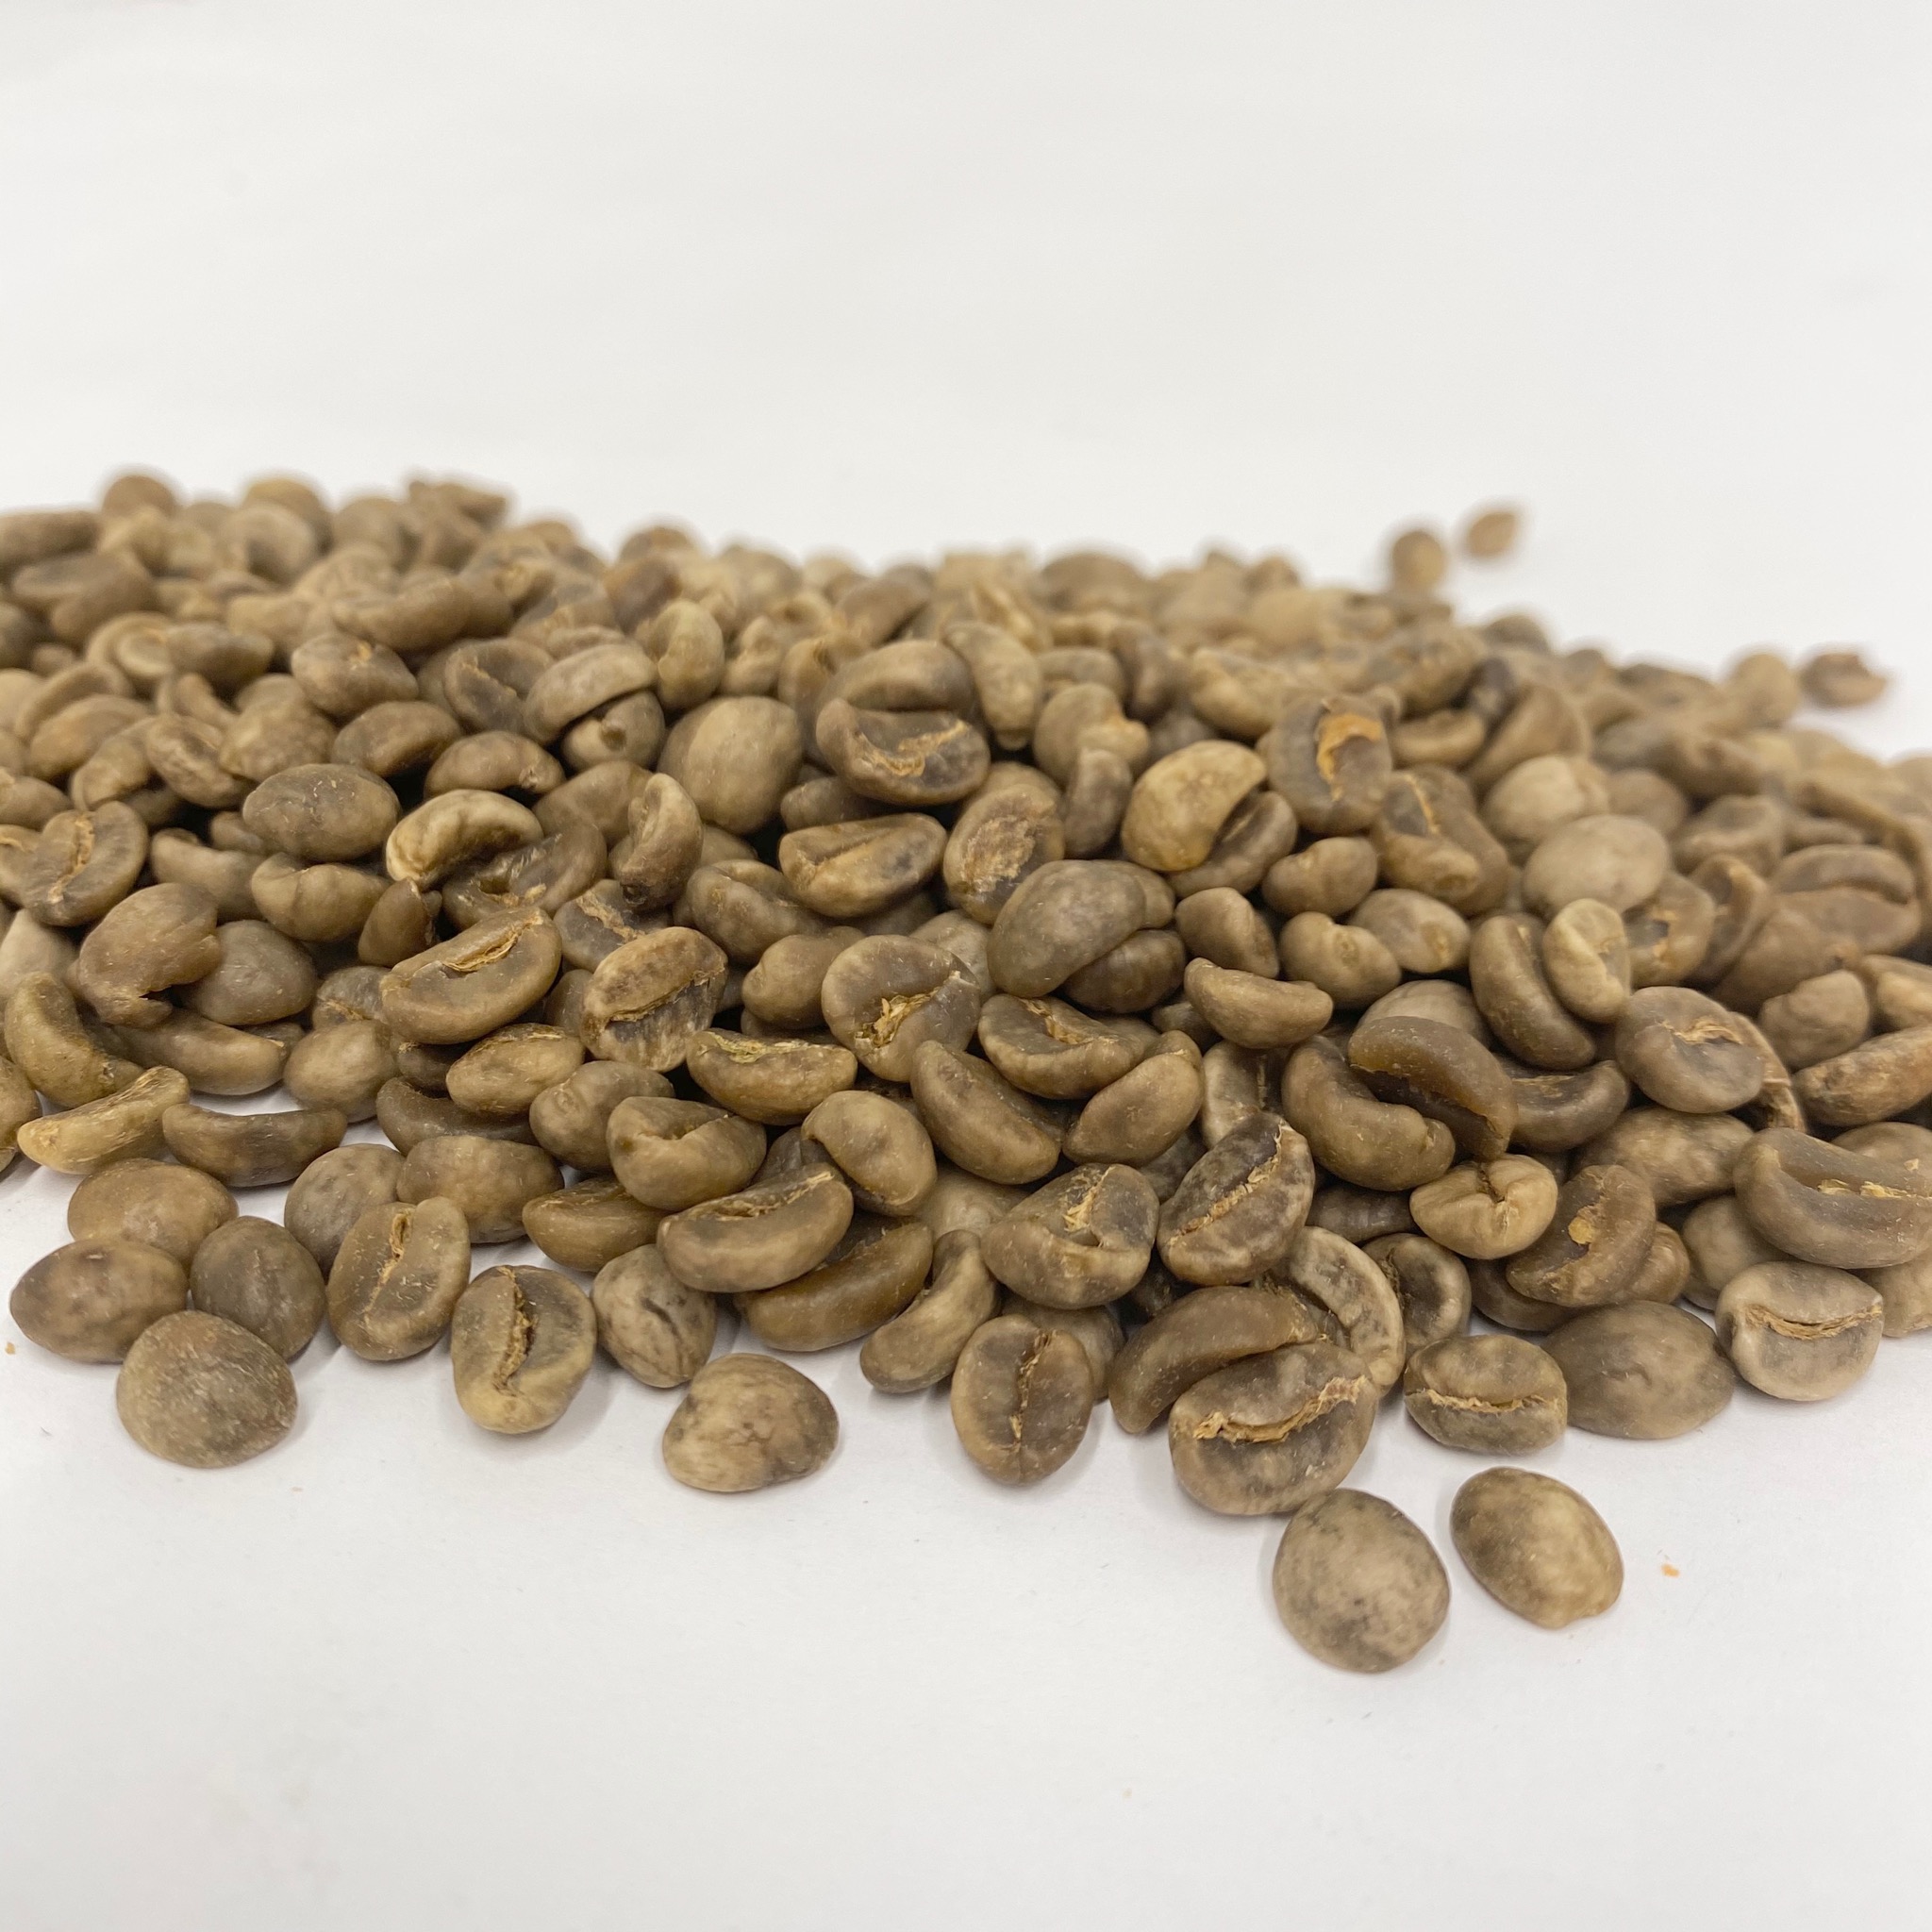 Colombia Decaf EA Process Green Coffee Beans